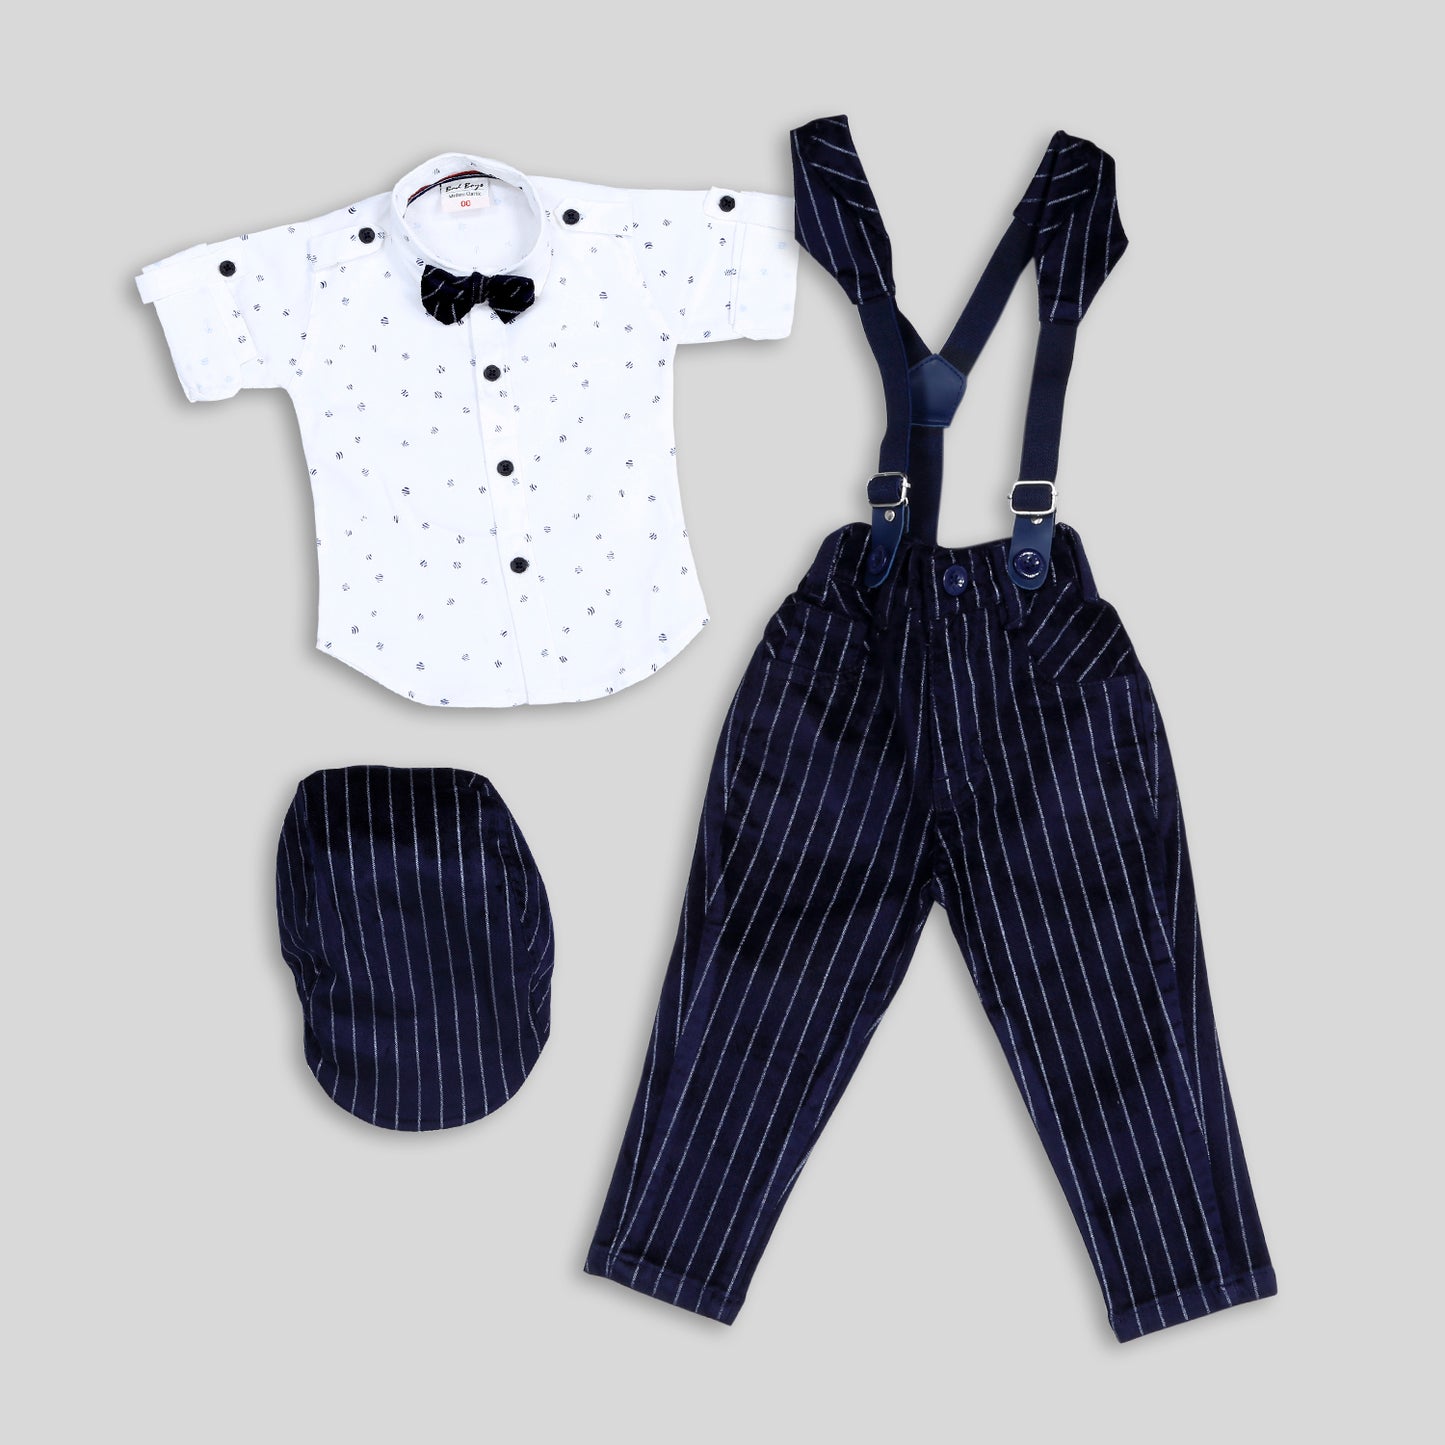 Party Outfit with Suspenders and a Bow.